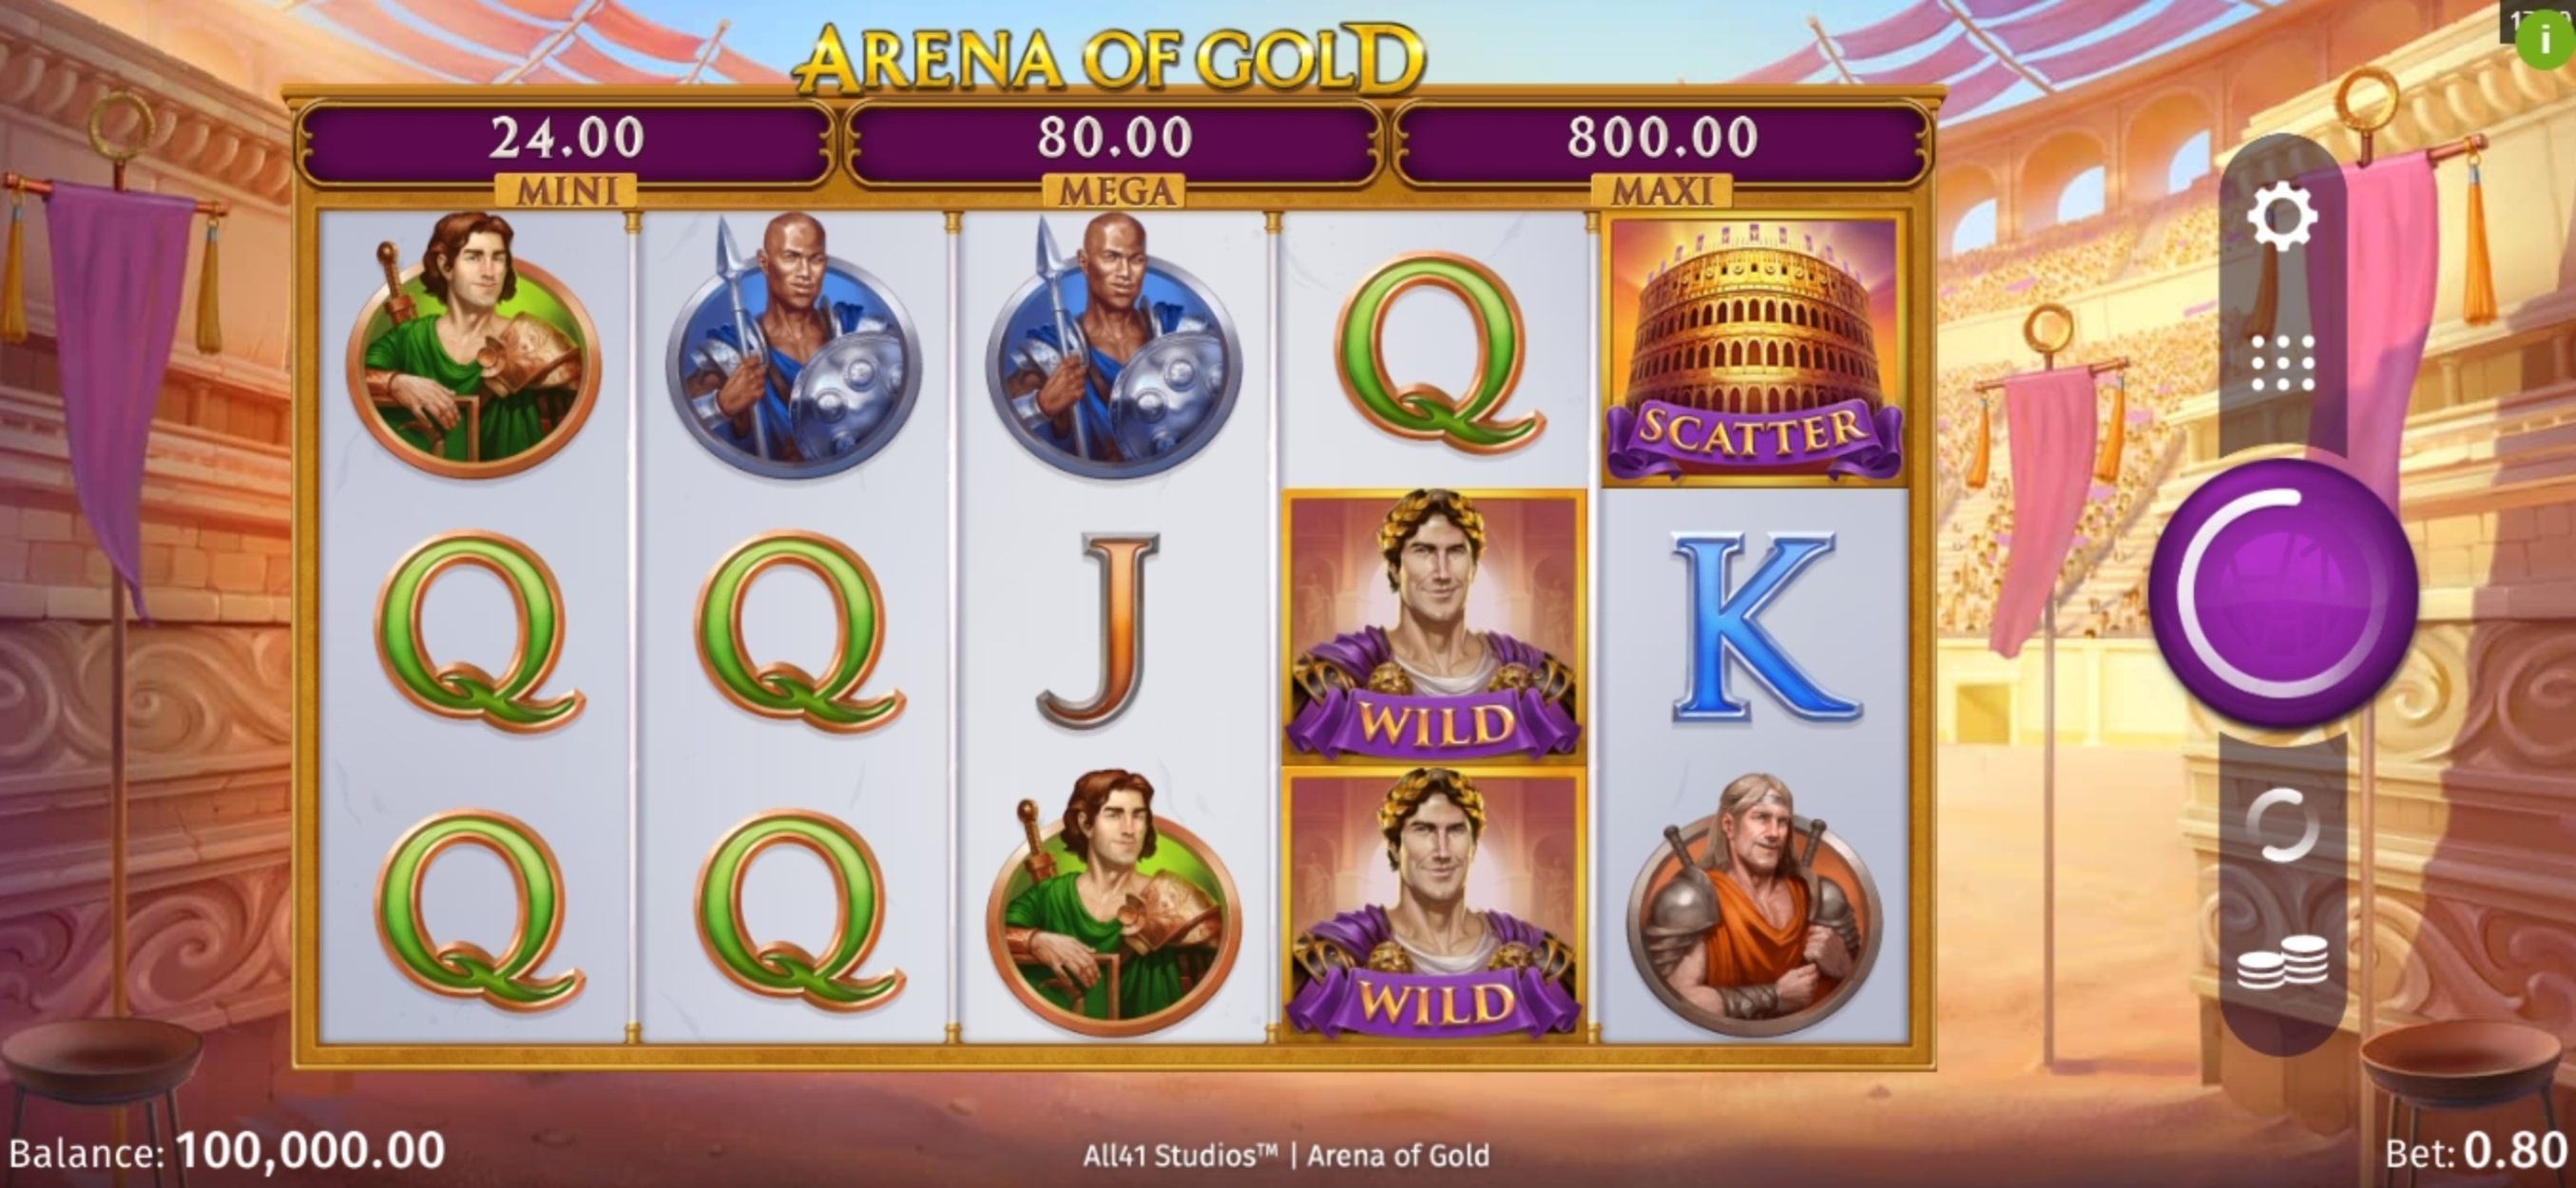 Reels in Arena of Gold Slot Game by All41 Studios